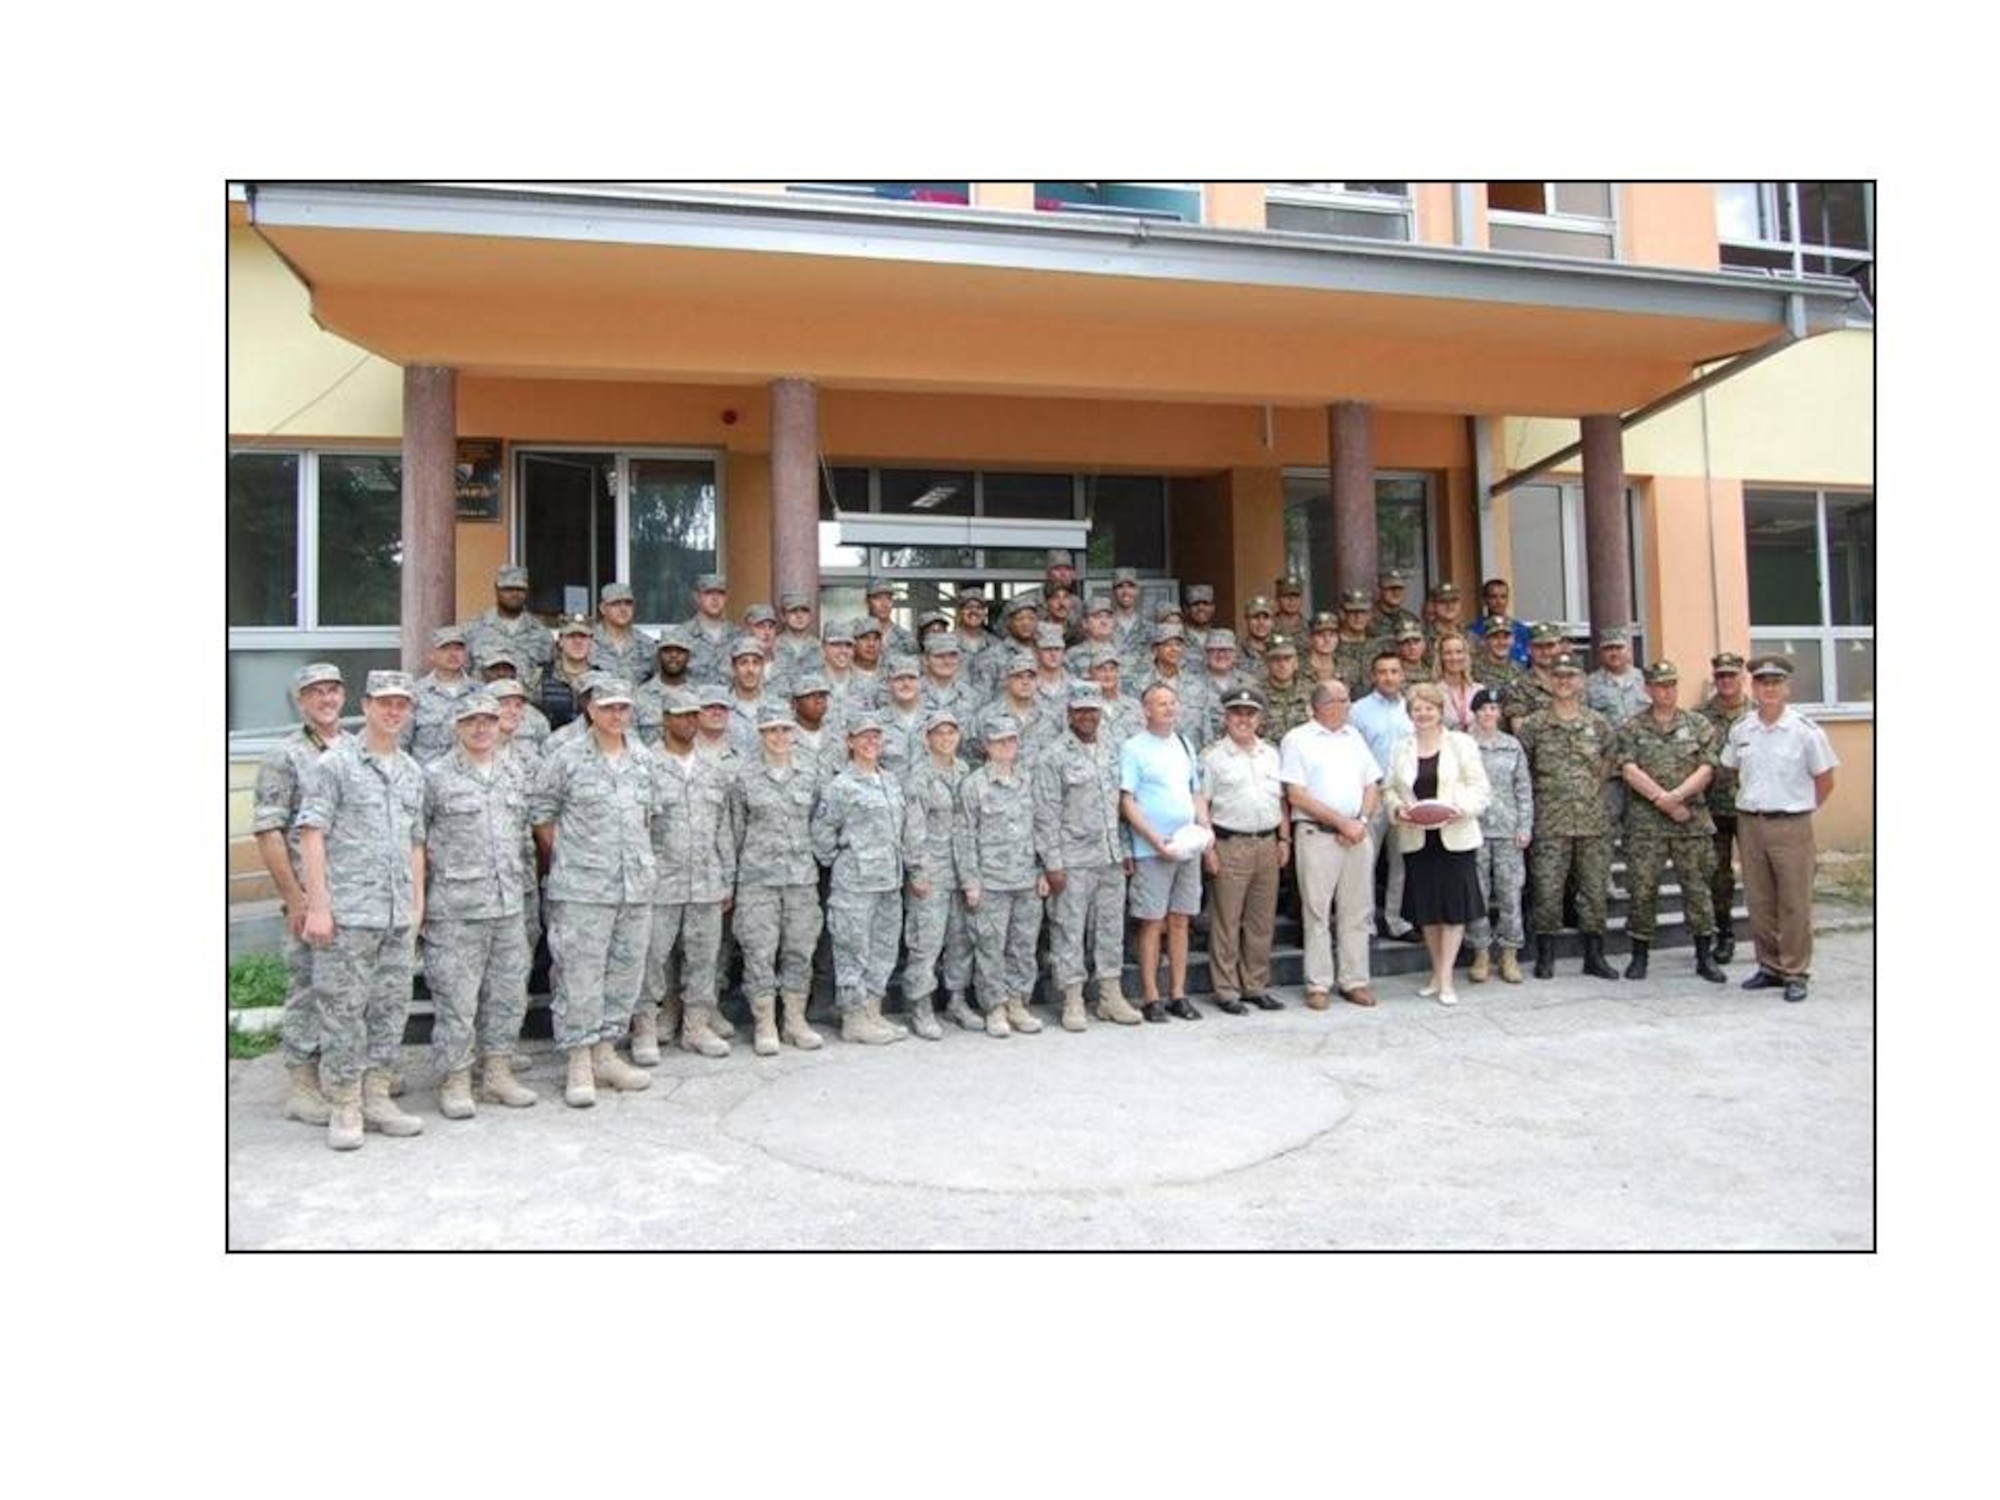 136th Civil Engineering Squadron, Texas Air National Guard, Bosnian Officials and friends pose in front of the school the unit help renovate along with (right to left) members of the Bosnian military, staff of the Office of Defense Cooperation, Vice-Principal, Mayor, General Puljic, and Principal. (Courtesy photo by 136 CES)